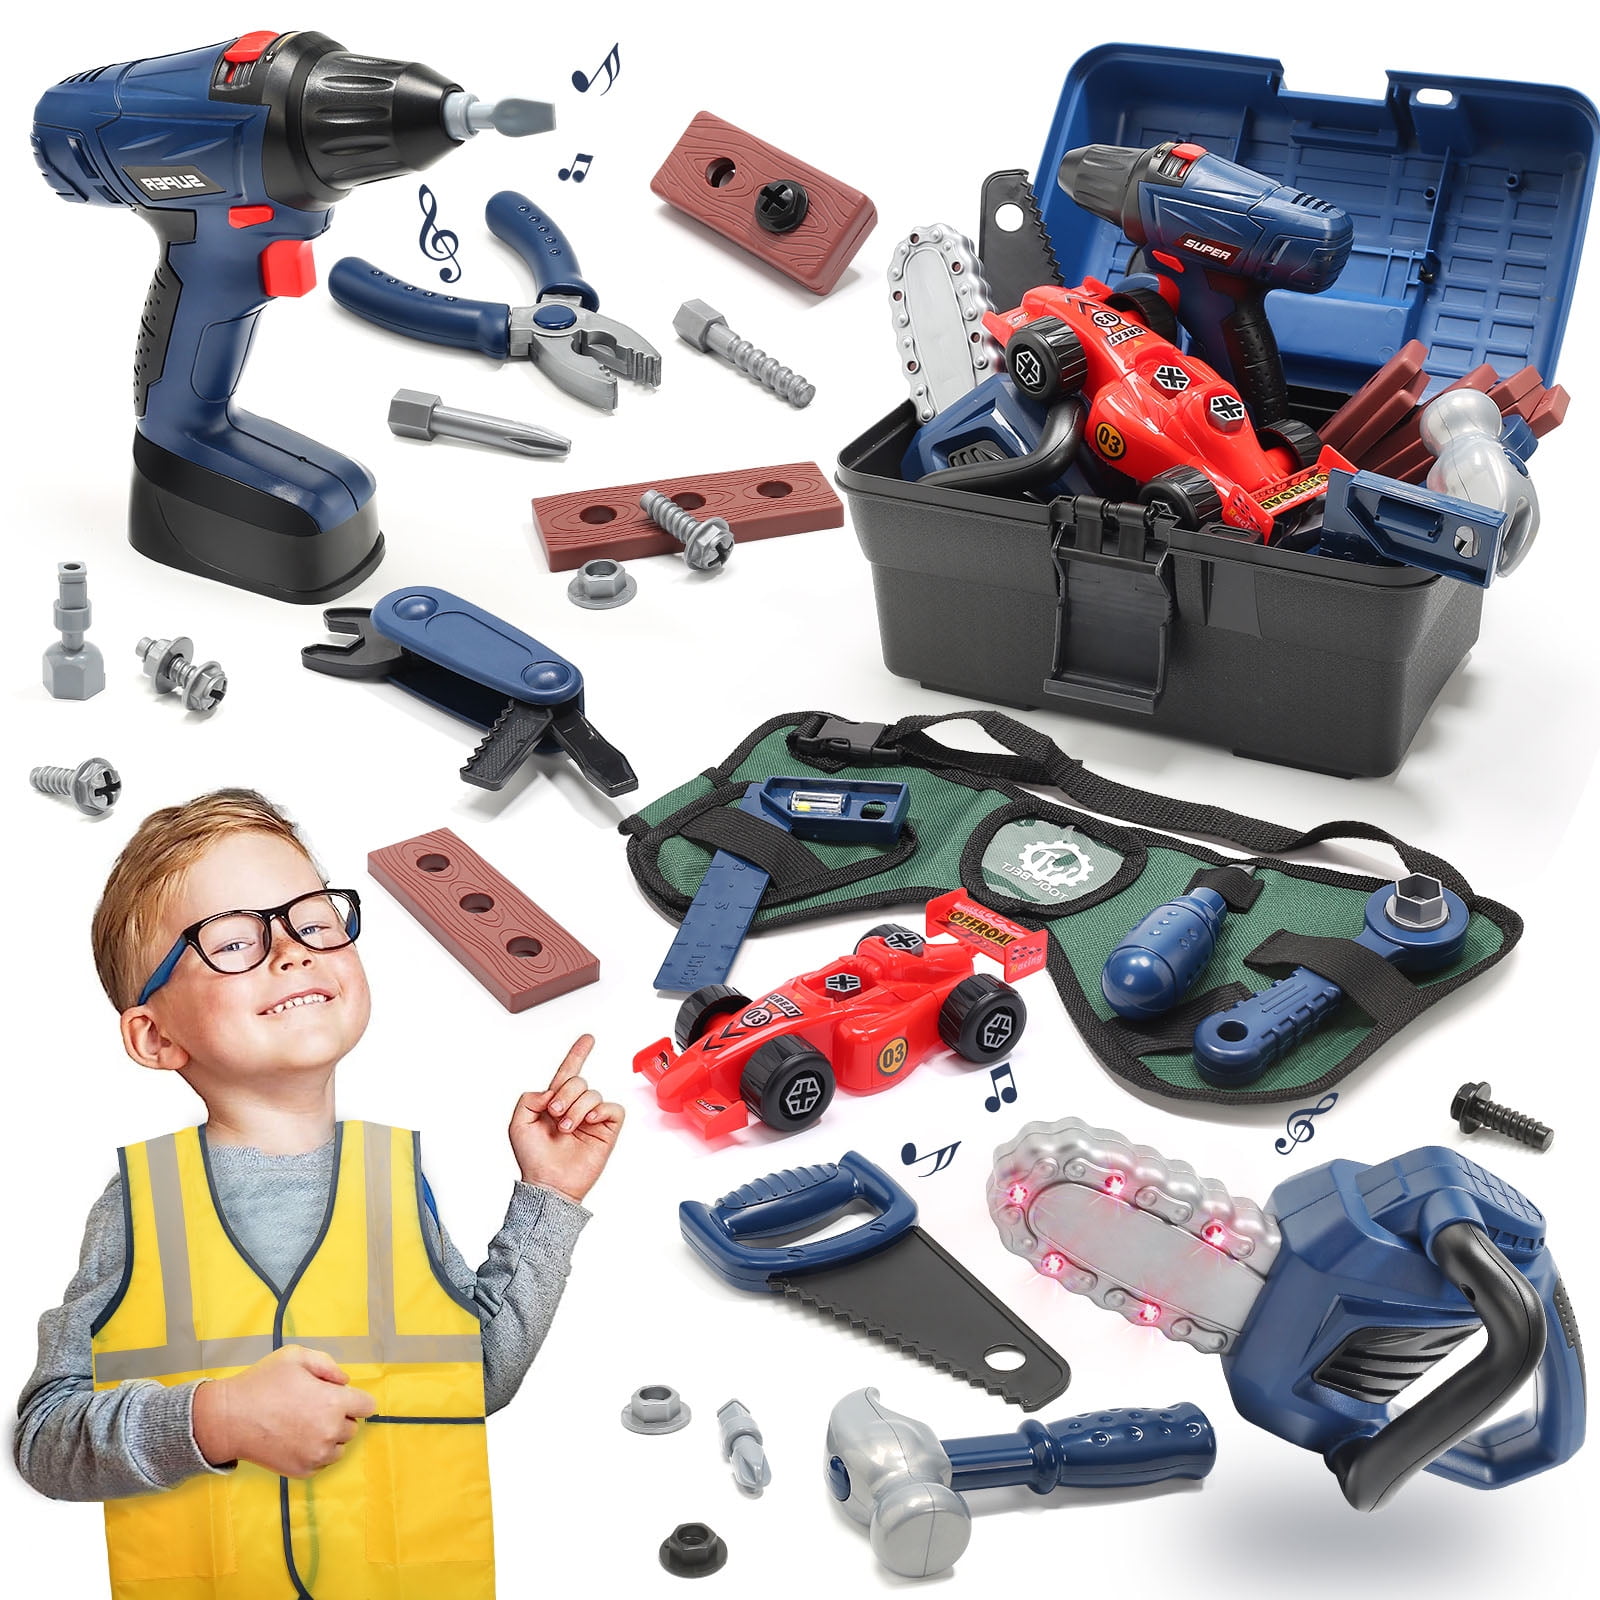 Black And Decker Workbench In Pretend Play Tool Sets for sale